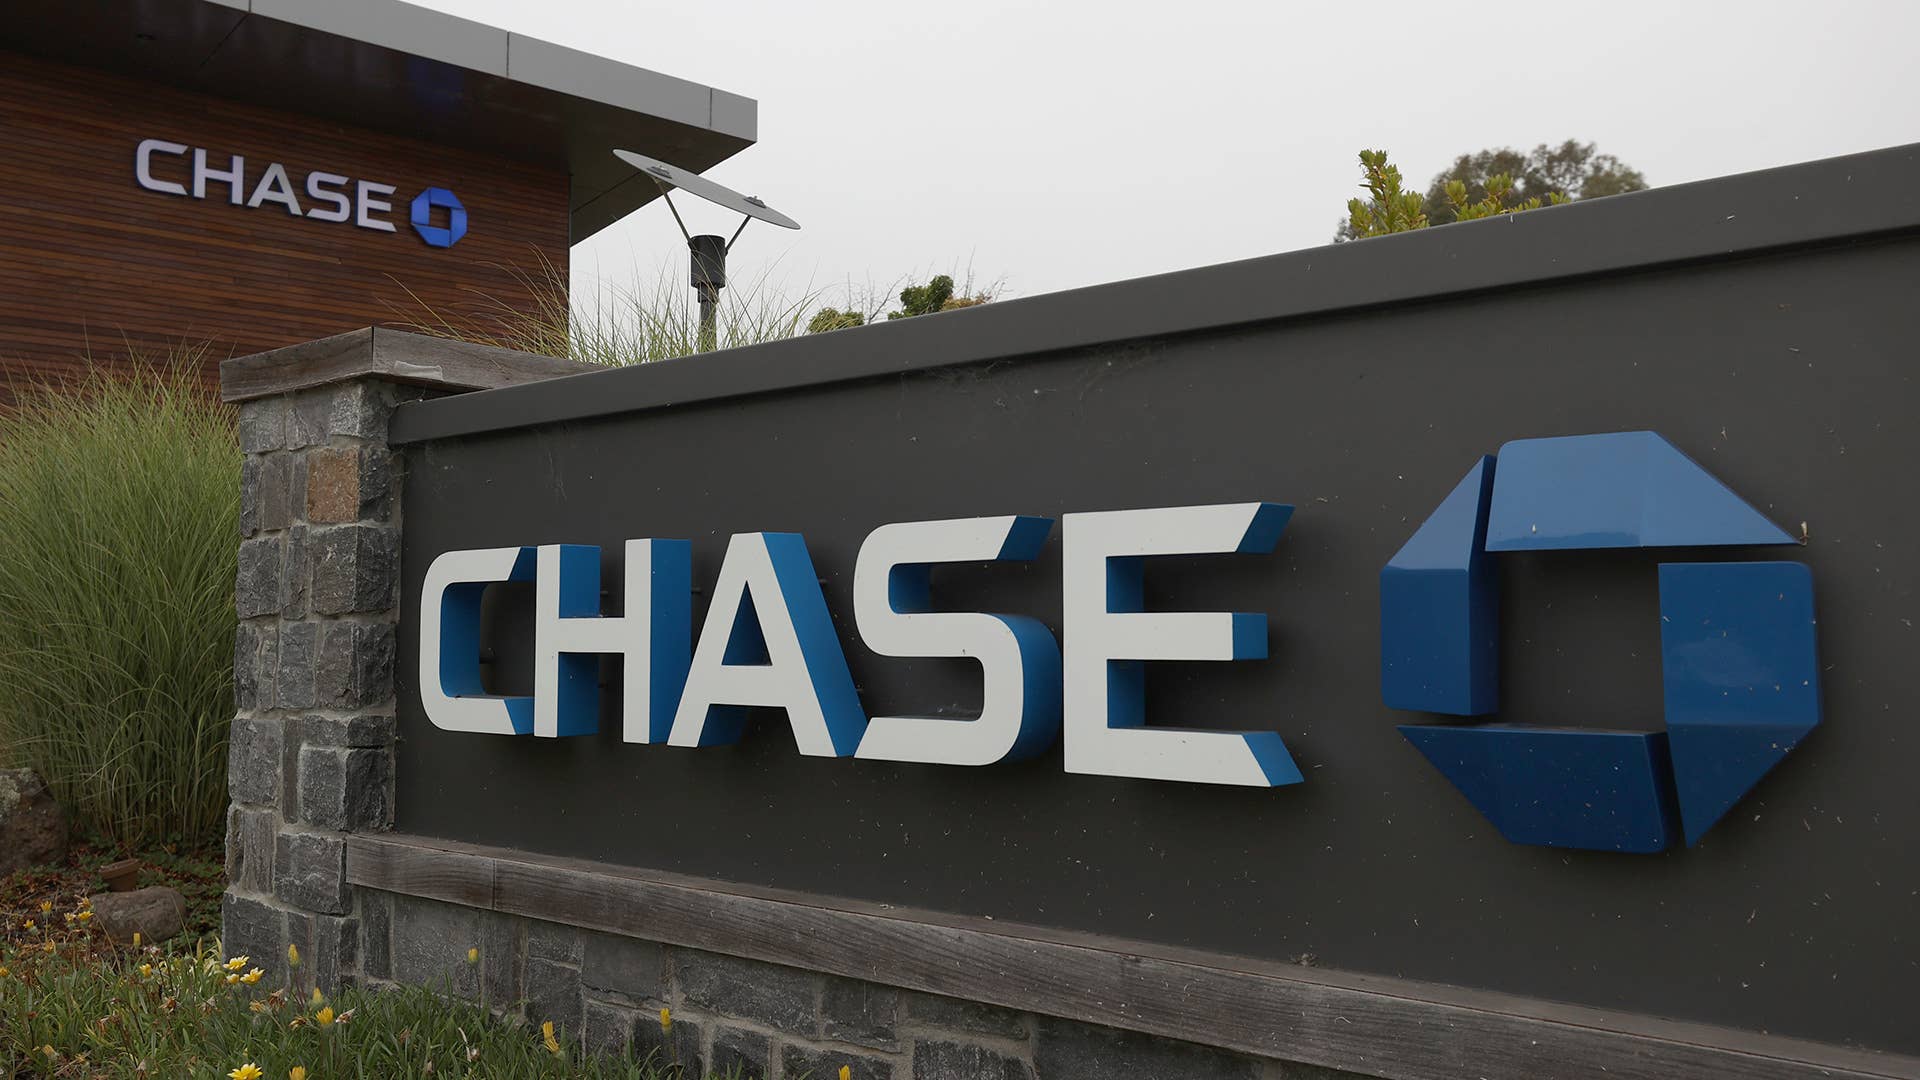 This is a photo of Chase Bank.